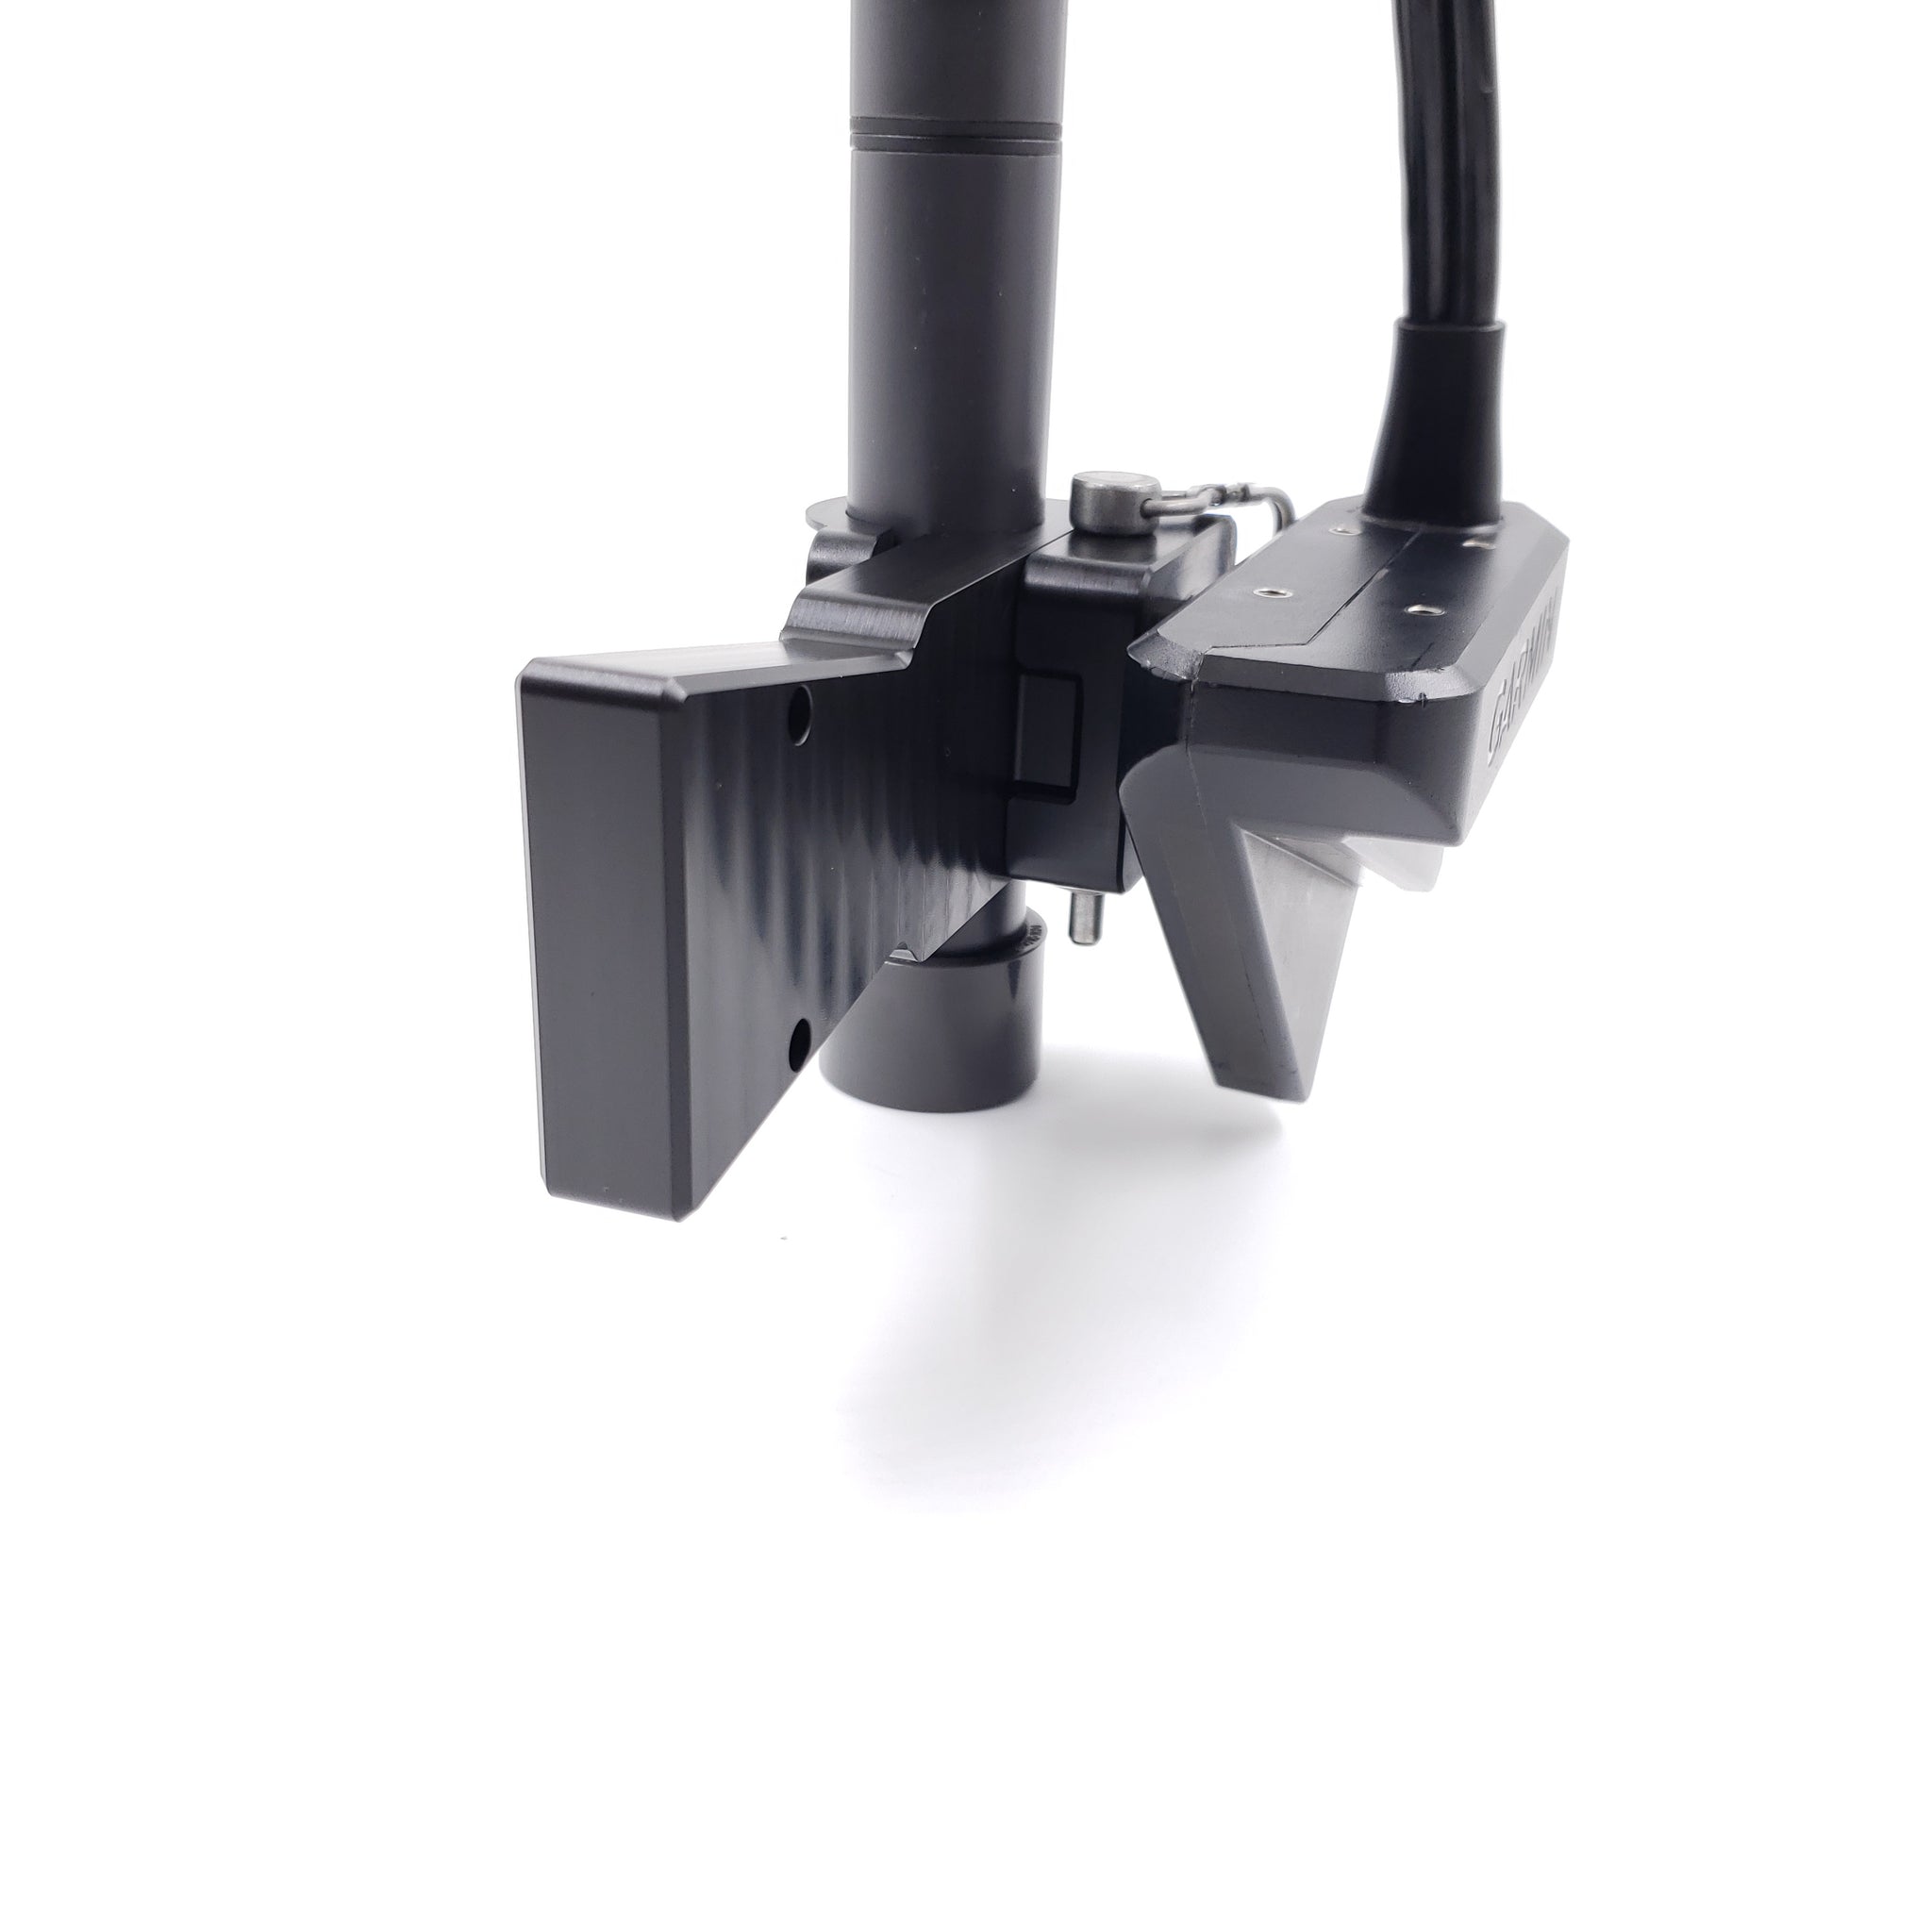 0 DEGREE QUICK RELEASE WITH PERSPECTIVE VIEW STRAIGHT TRANSDUCER